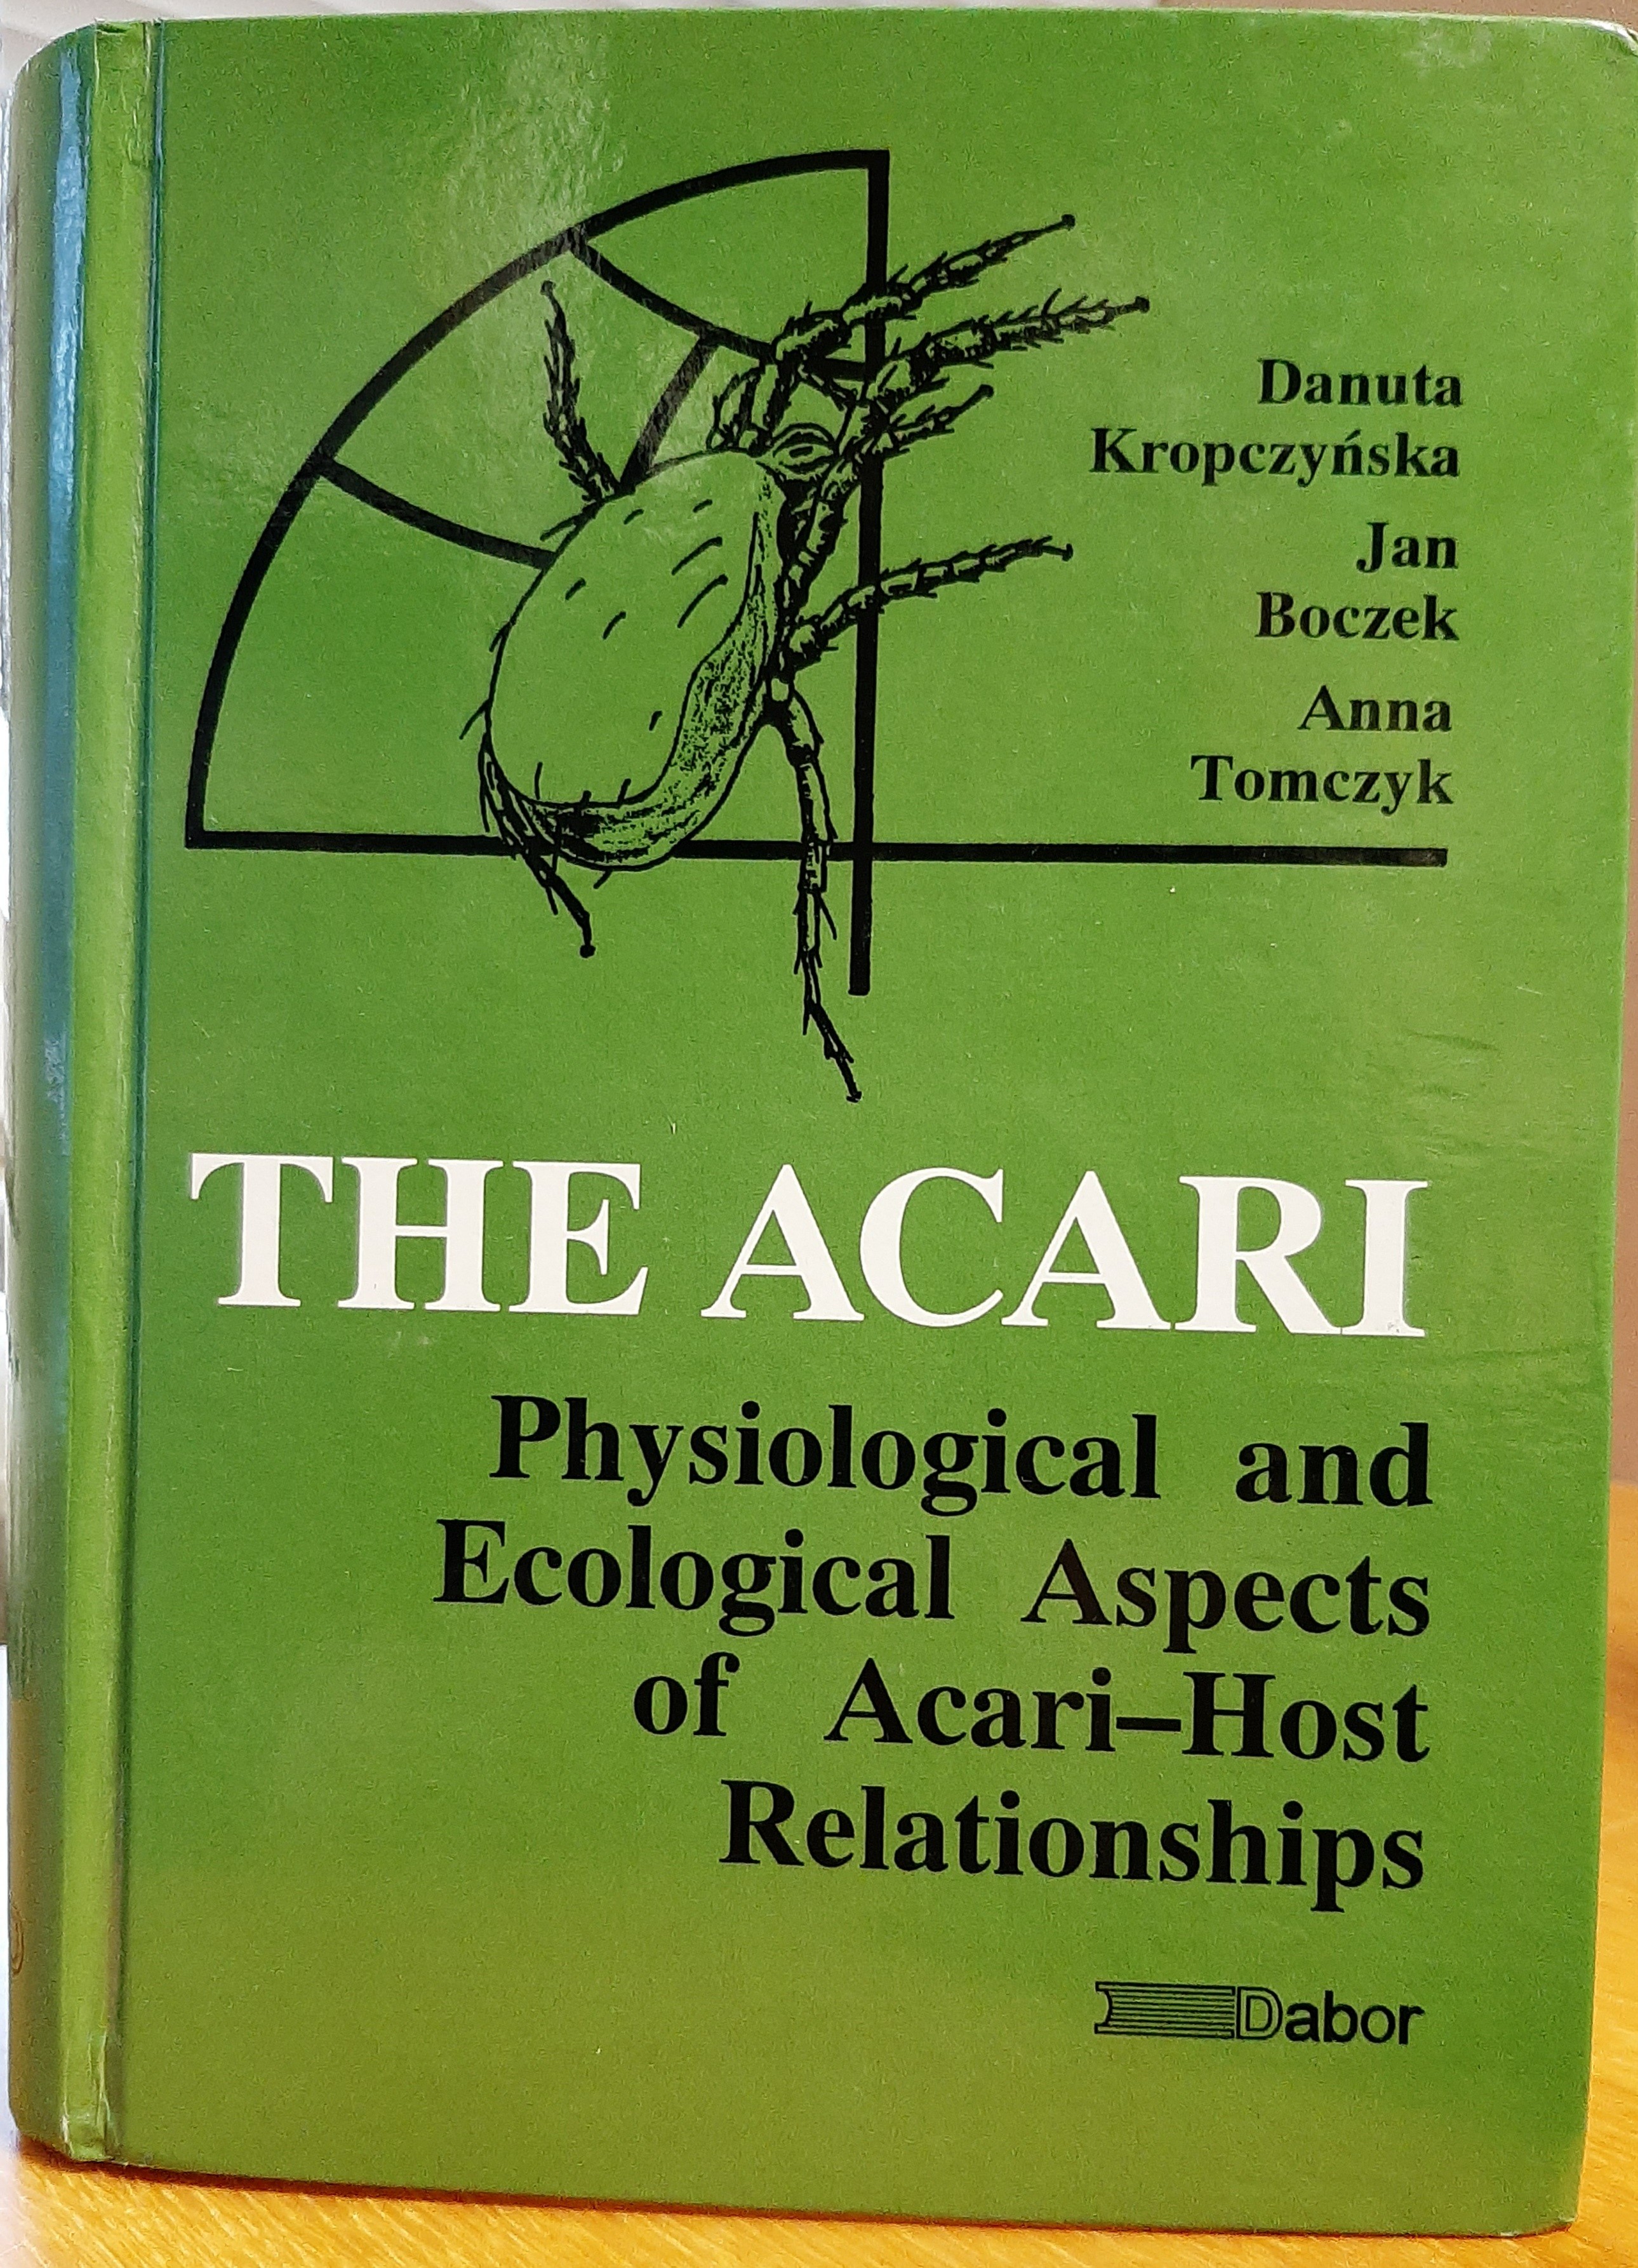 The Acari. Physiological and Ecological Aspects of Acari-Host Relationships (Rippl-Rónai Múzeum CC BY-NC-ND)